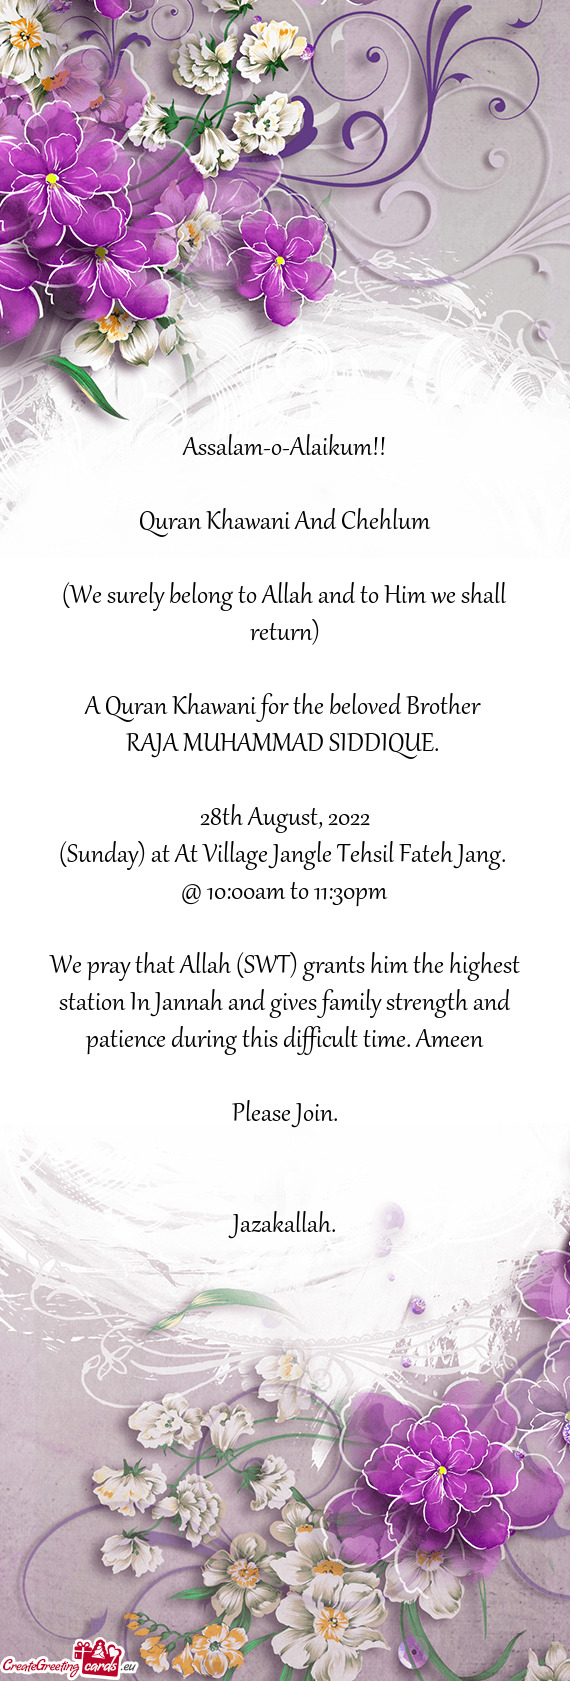 A Quran Khawani for the beloved Brother